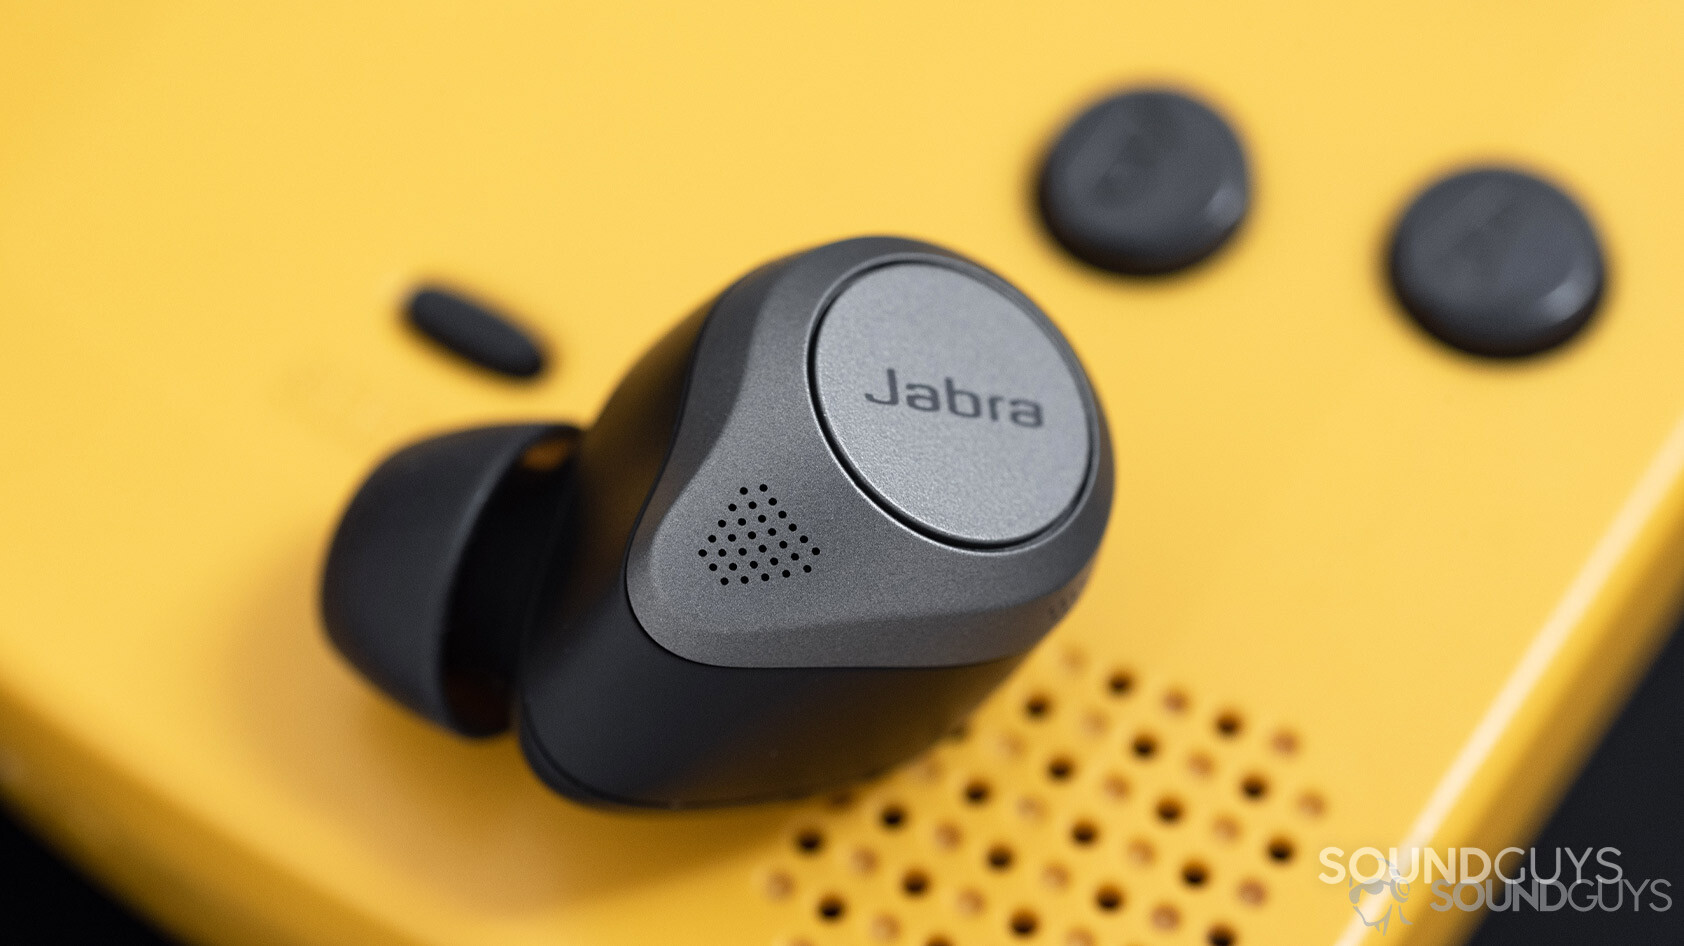 The Jabra Elite 85t noise canceling true wireless earbuds microphone holes next to a Gameboy Color speaker grill.